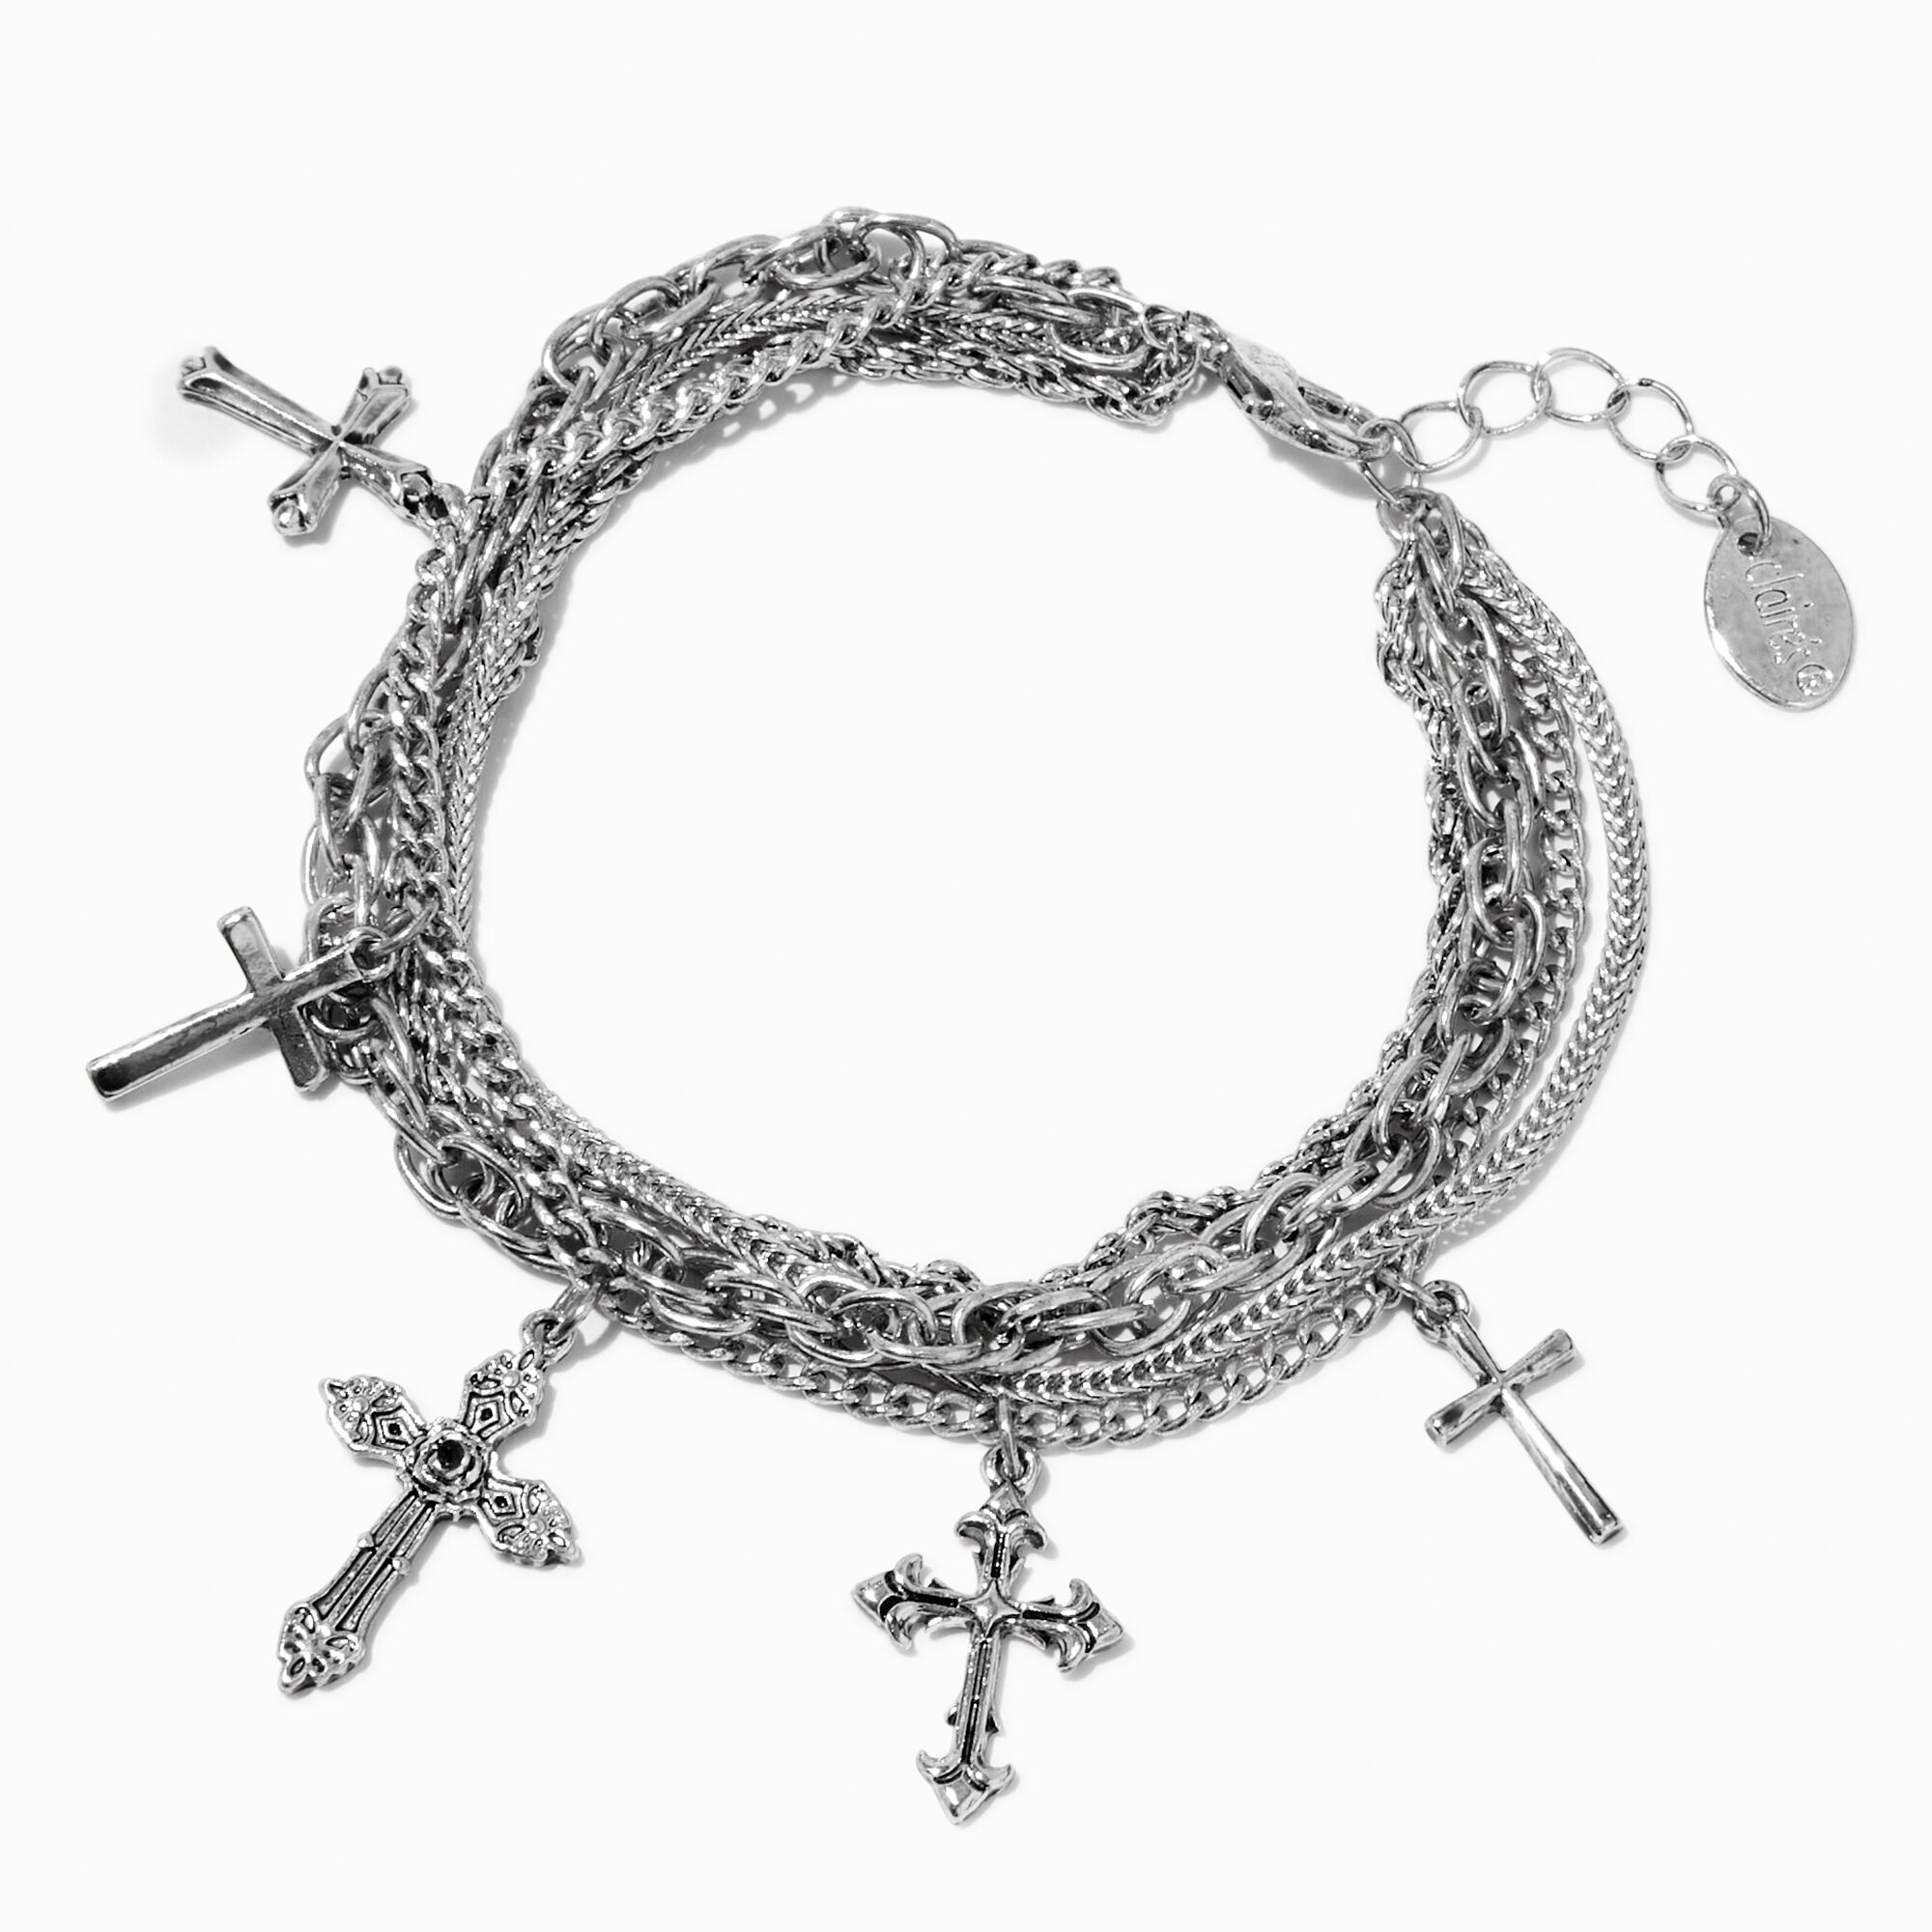 View Claires Tone Cross Charms MultiStrand Chain Bracelet Silver information